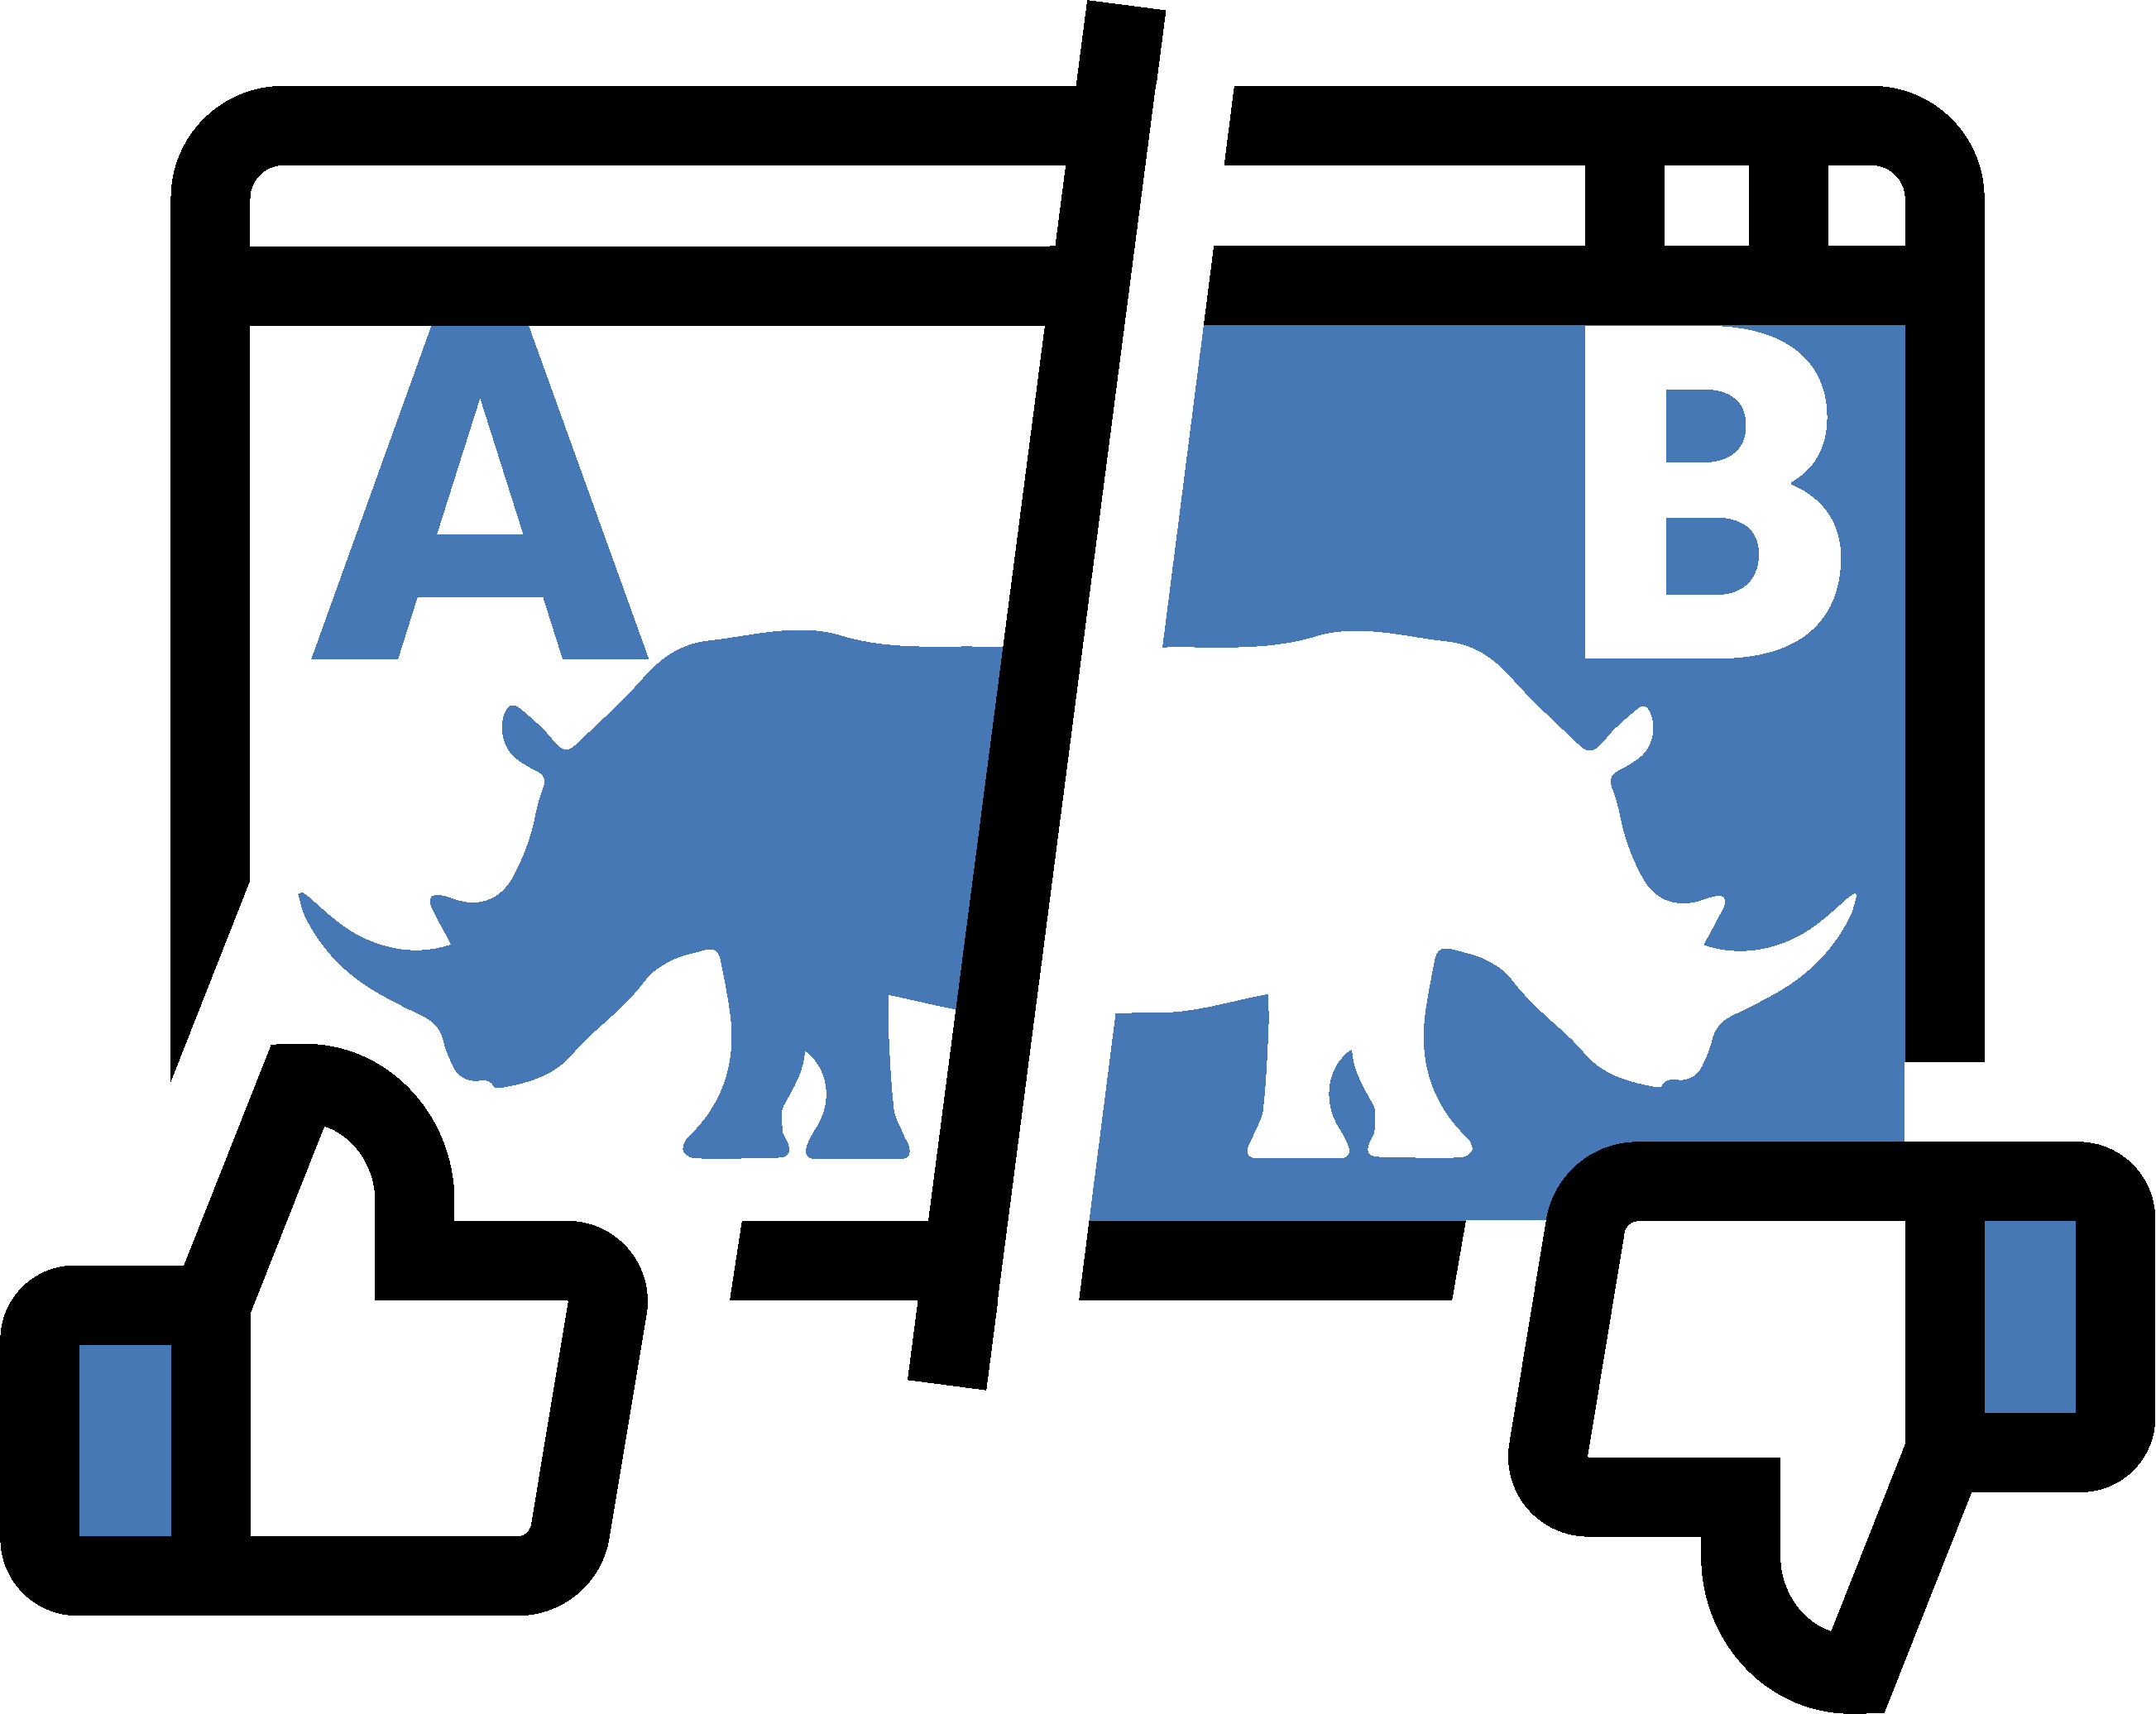 An illustration of A/B testing.